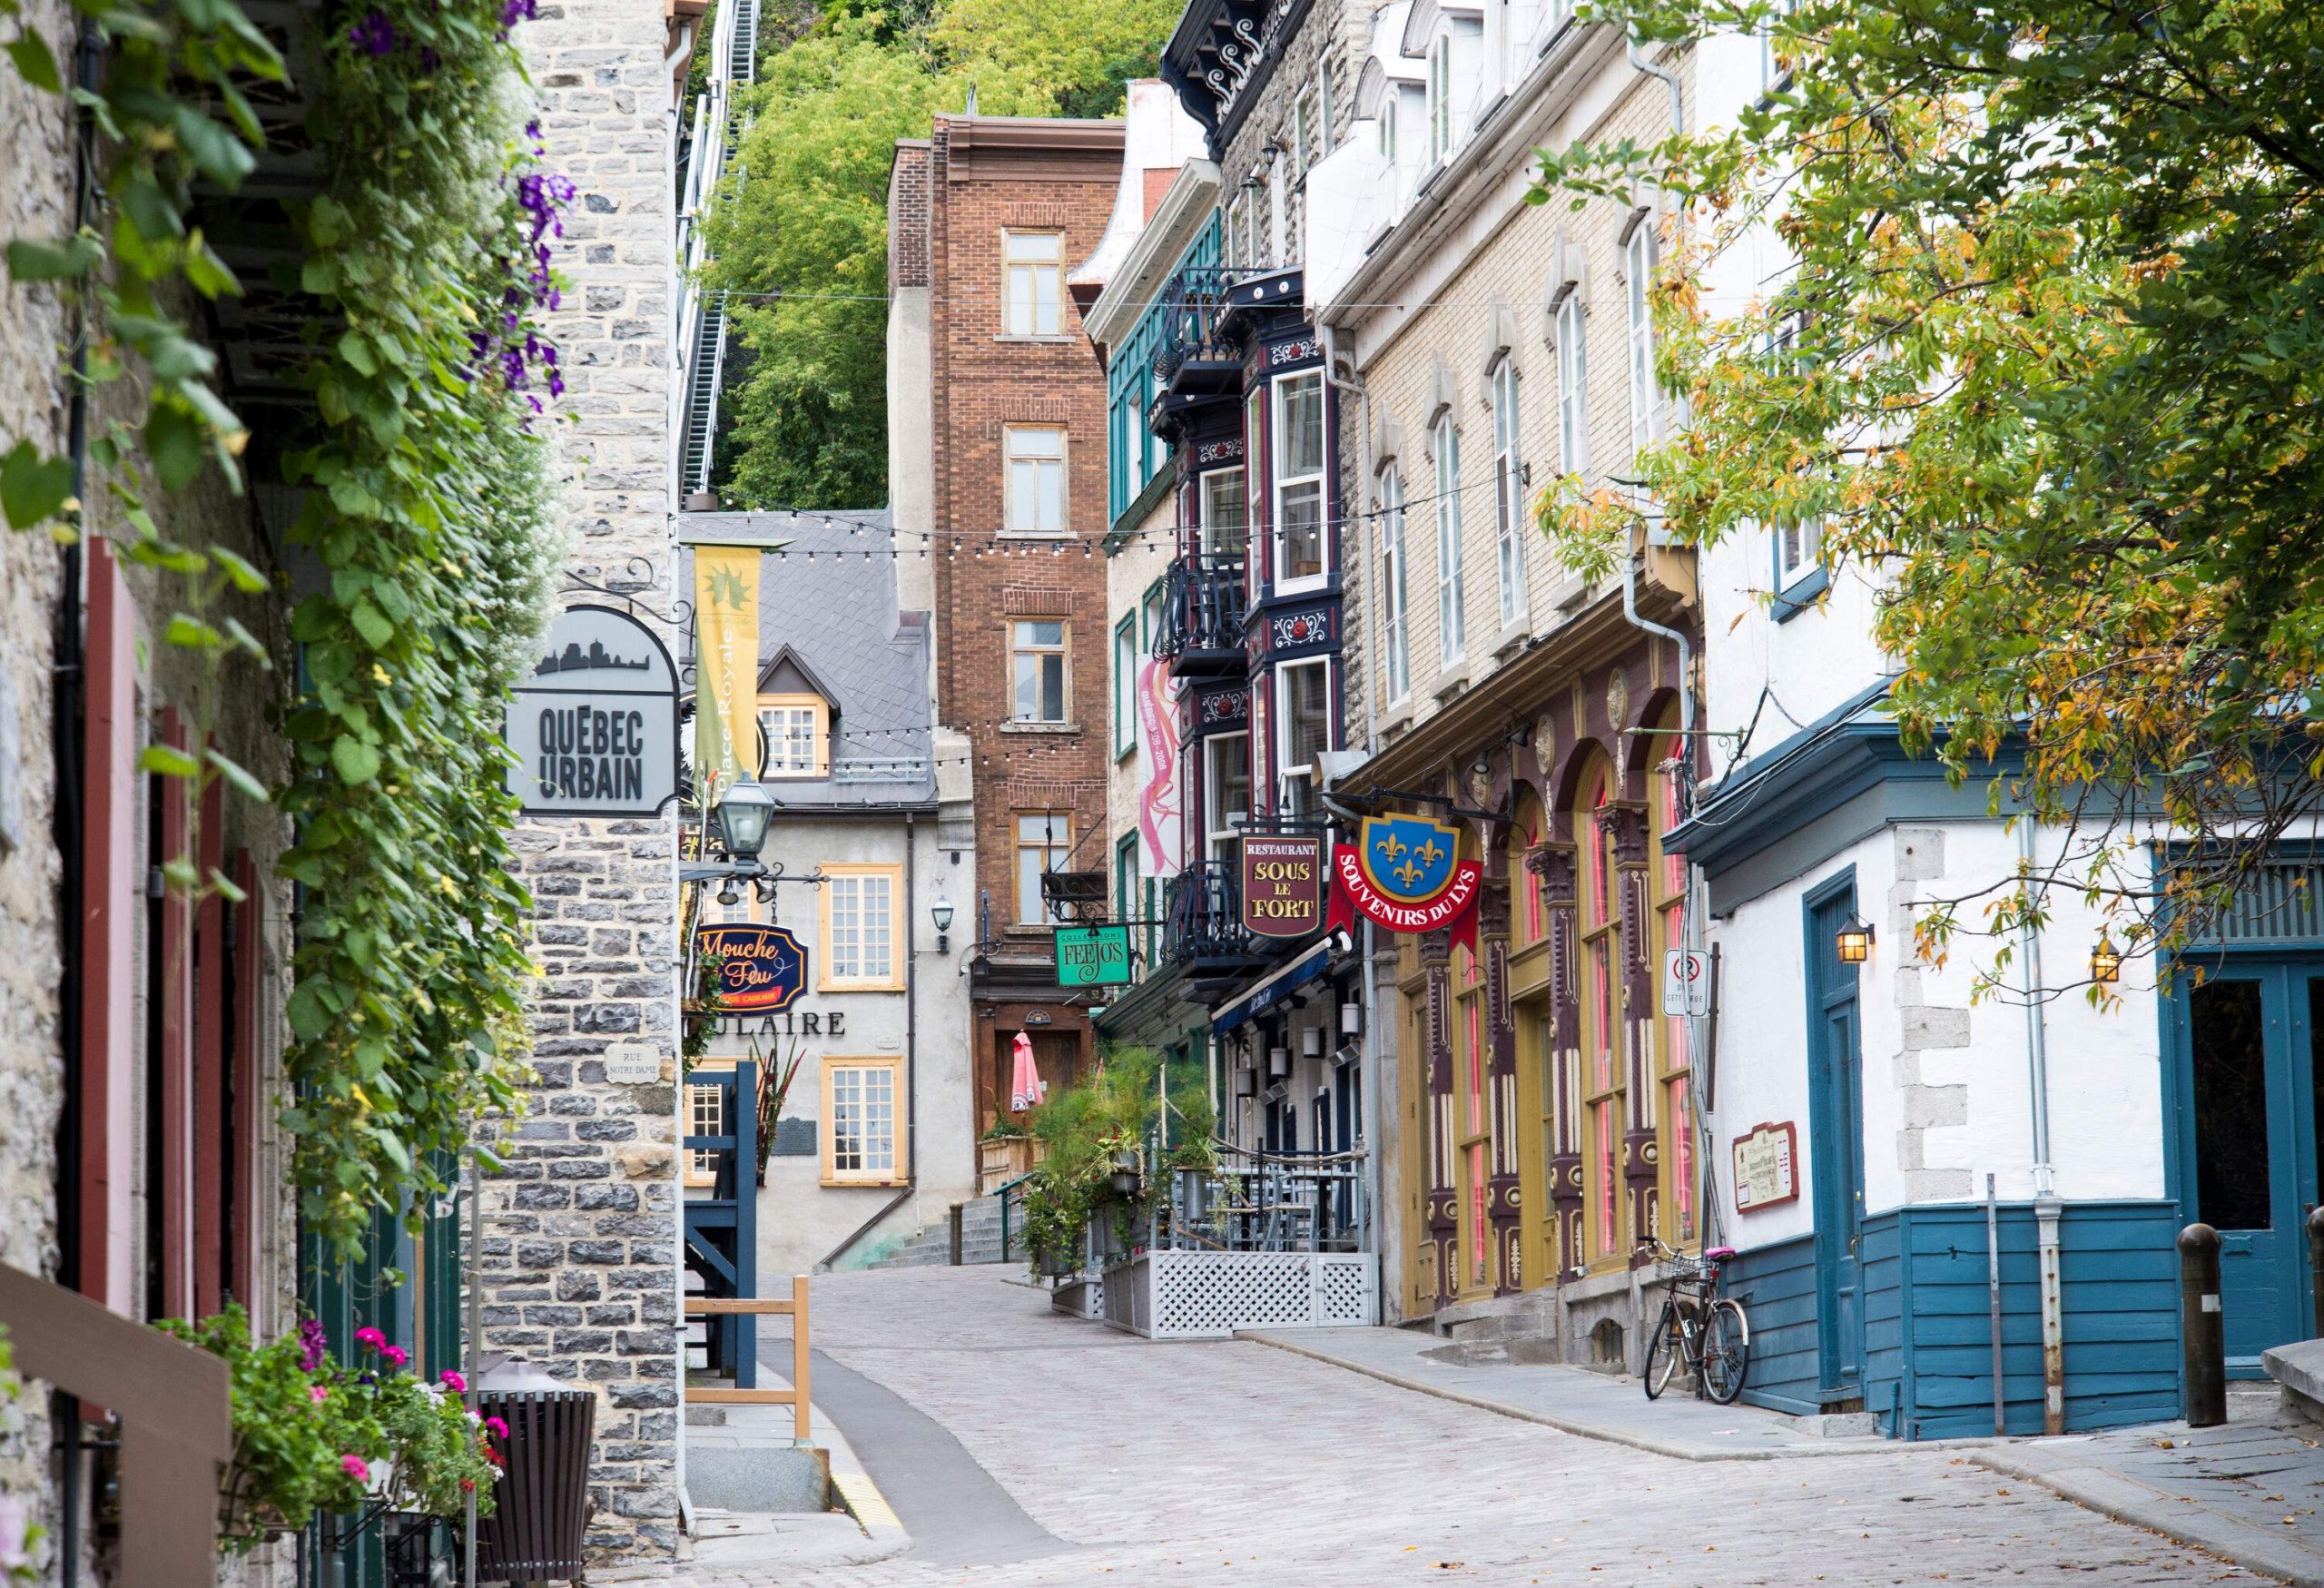 A quaint shopping street in the city of Quebec.